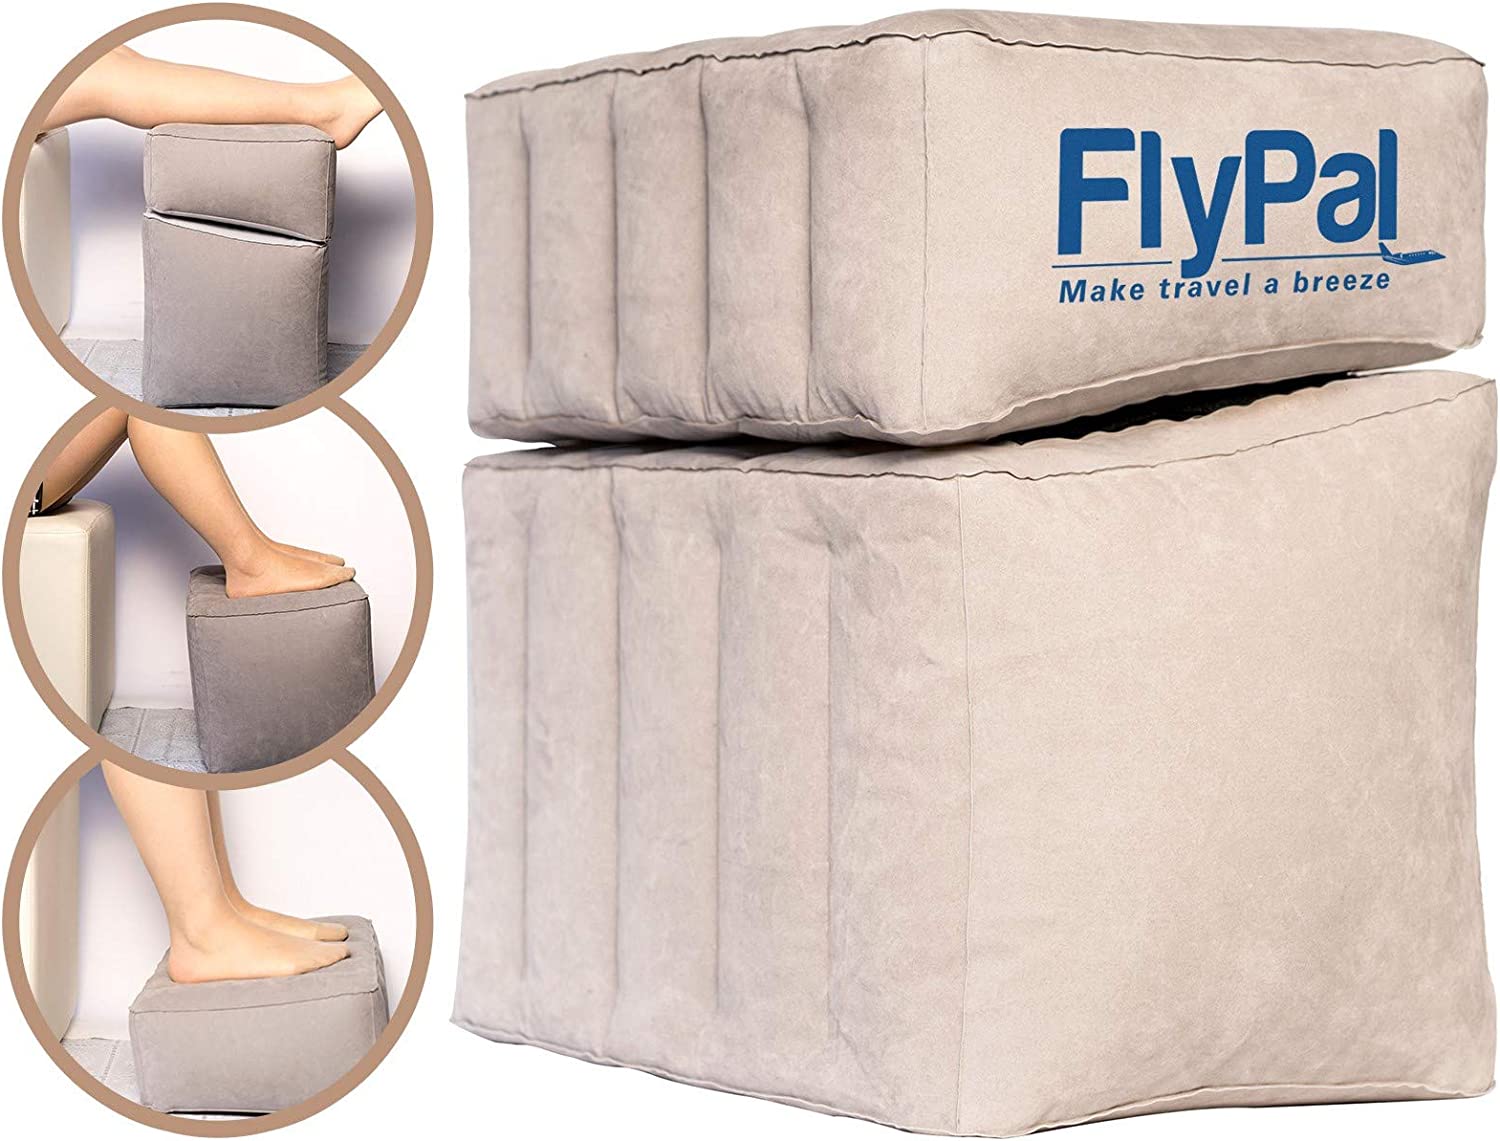 Flypal Inflatable Foot Rest for Air Travel, U.S Patented 2 in 1 Design, Blow-Up Pillow Cushion for Home, Office and Kids to Sleep on Long Flights, 17“x11 x17, Grey.